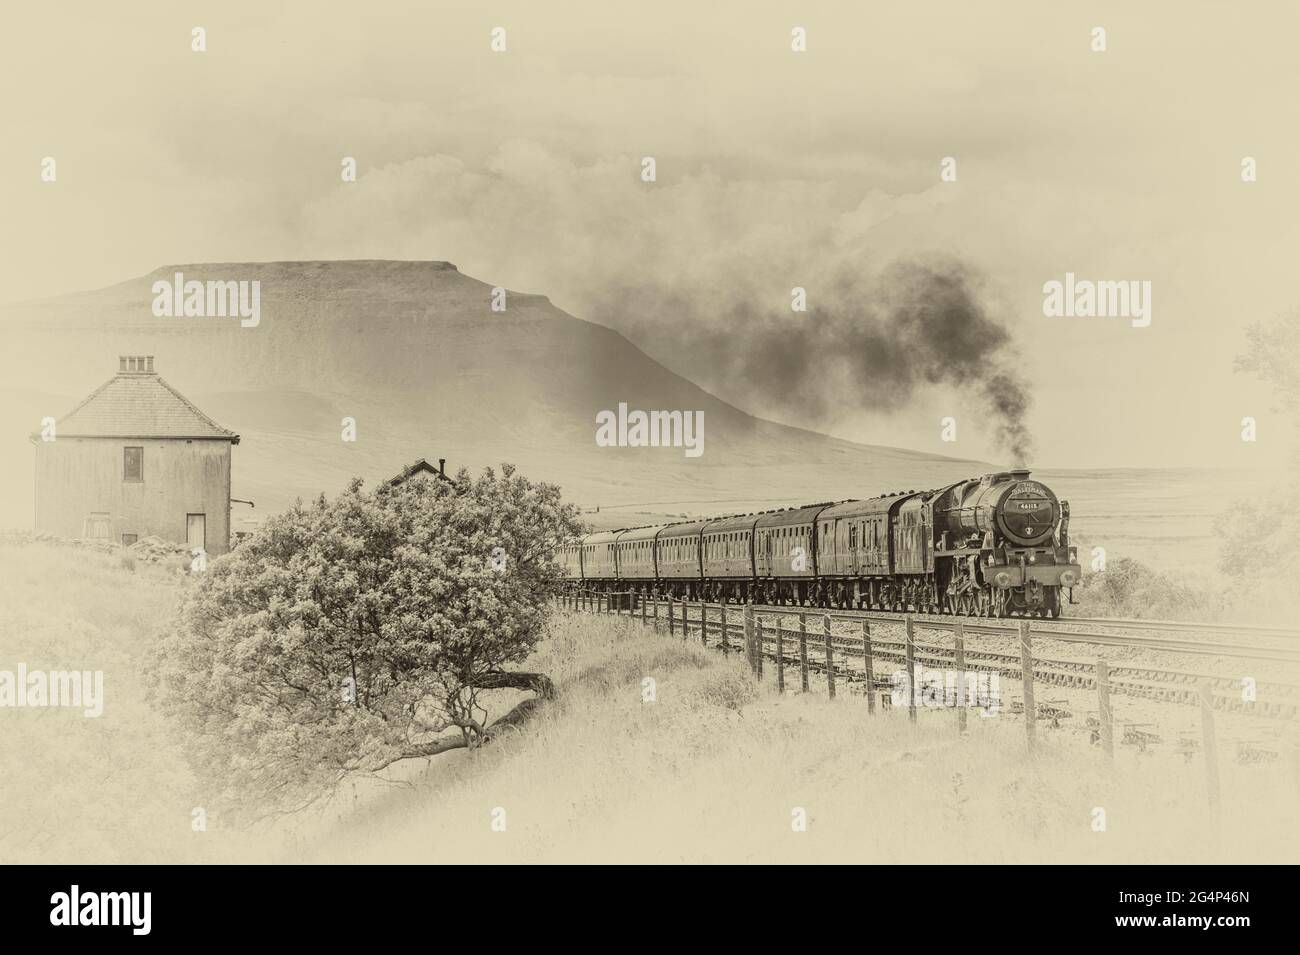 The Dalesman headed by 46115 Scots Guardsman steam train just passing Blea Moor signal box with Ingleborough mountain in the background Stock Photo